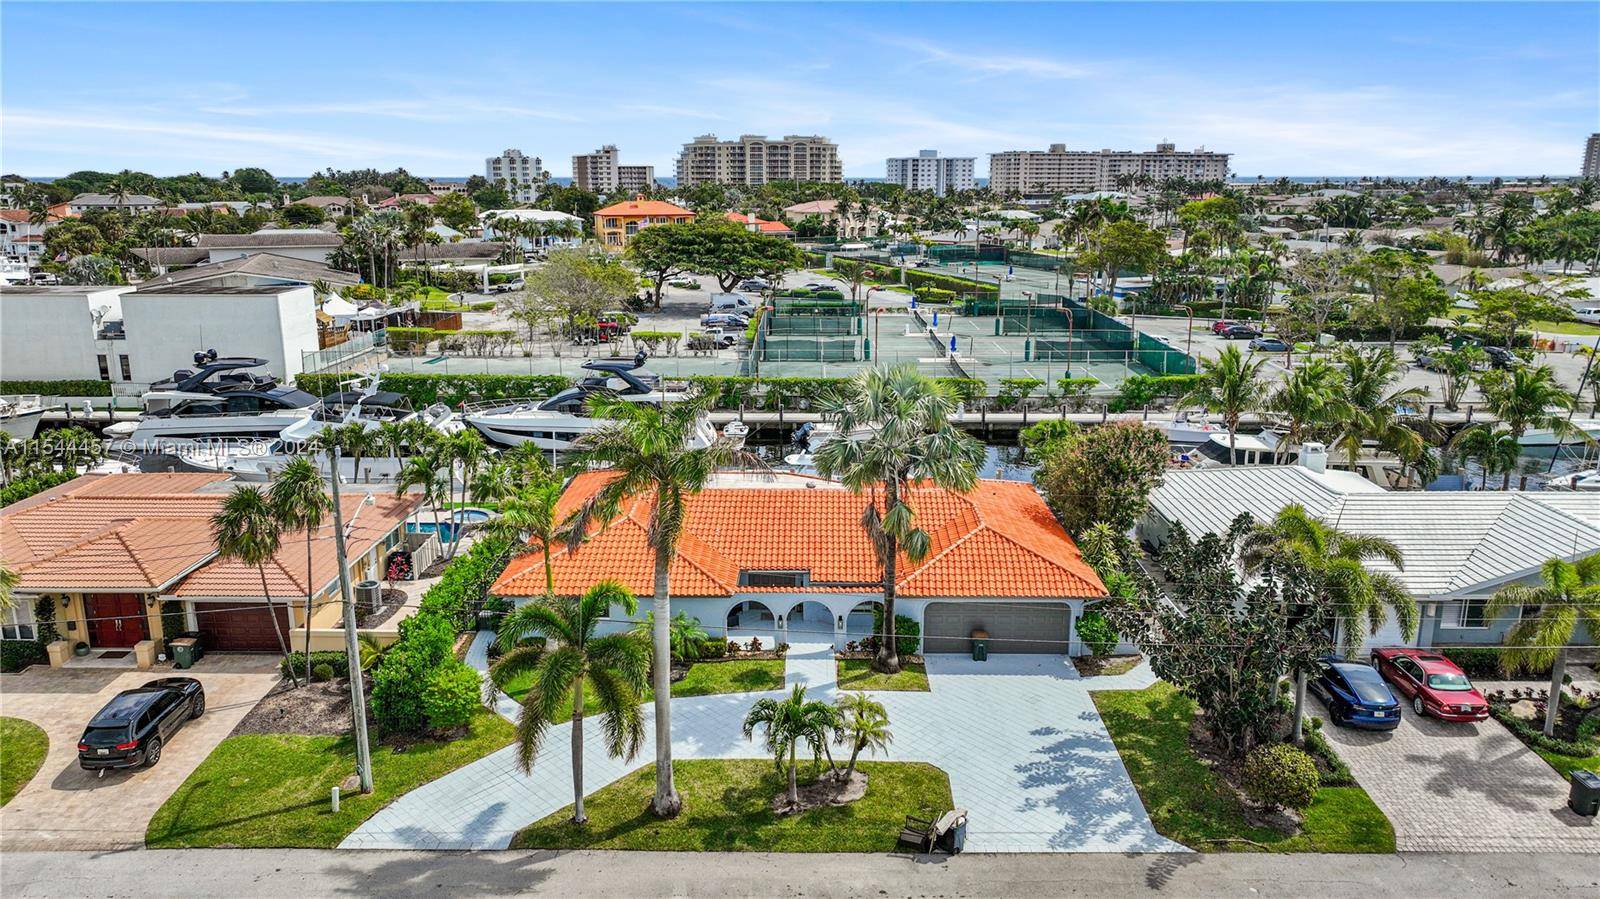 Welcome to this charming three bedroom, three bathroom home located in the prestigious Venetian Isles of Lighthouse Point, just minutes from the yacht club and the Hillsboro Inlet.